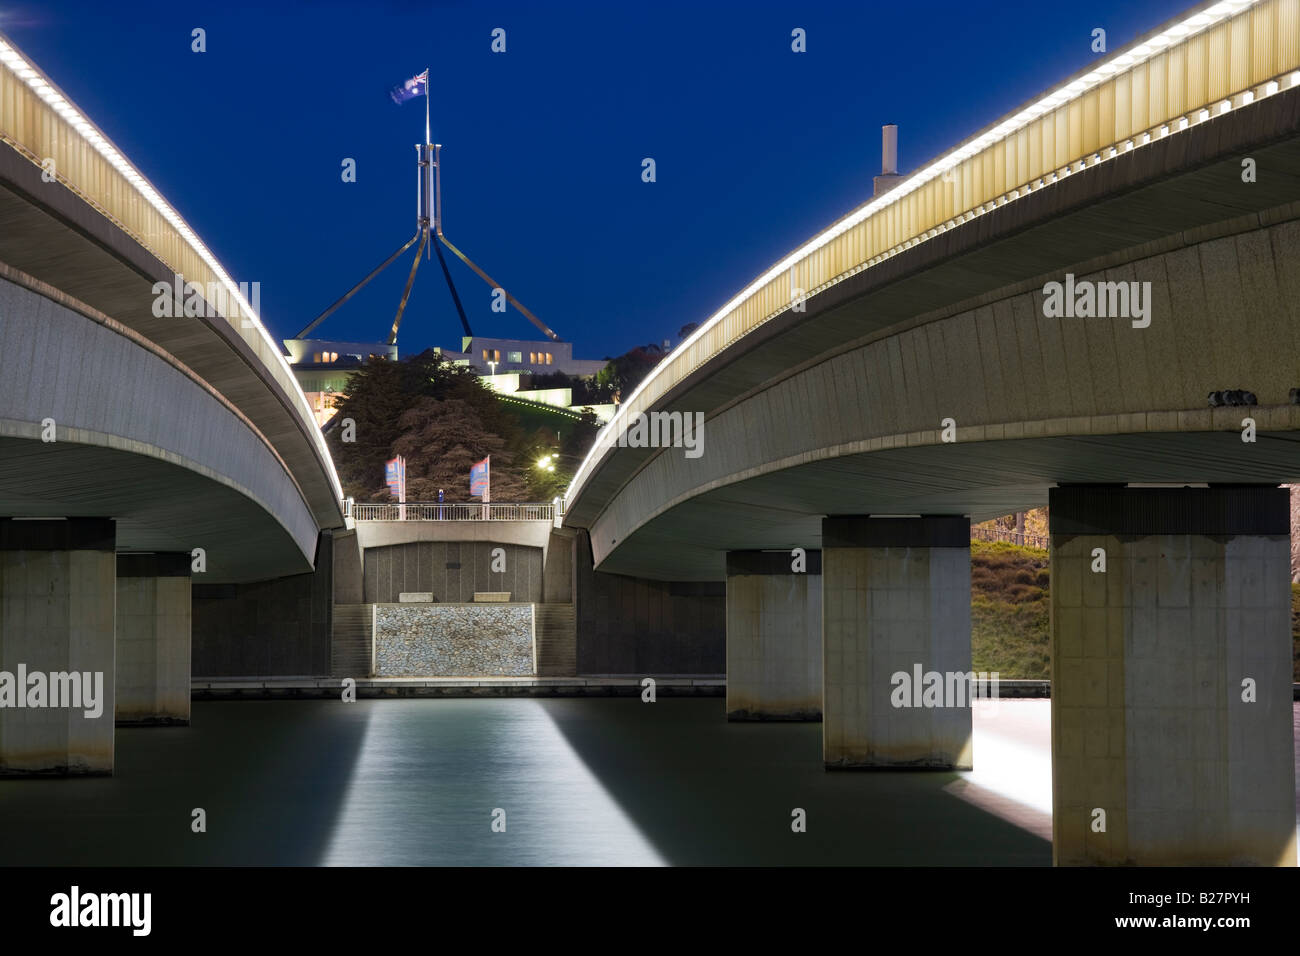 Canberra Australian Parliament House with Flagpole seen through Commonwealth Avenue Bridge over Lake Burley Griffin, Canberra Australia Stock Photo